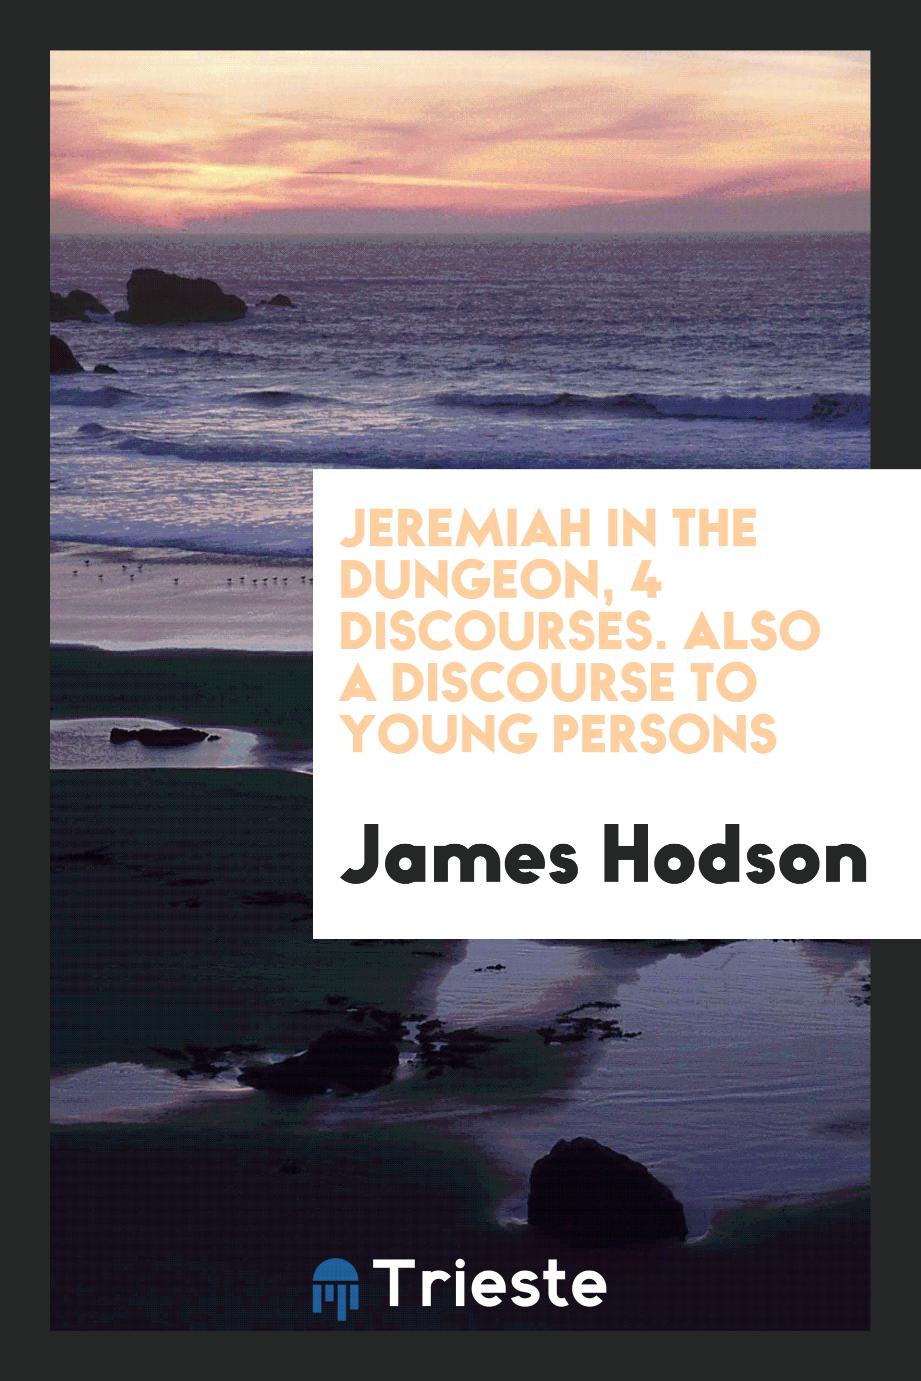 Jeremiah in the dungeon, 4 discourses. Also a discourse to young persons